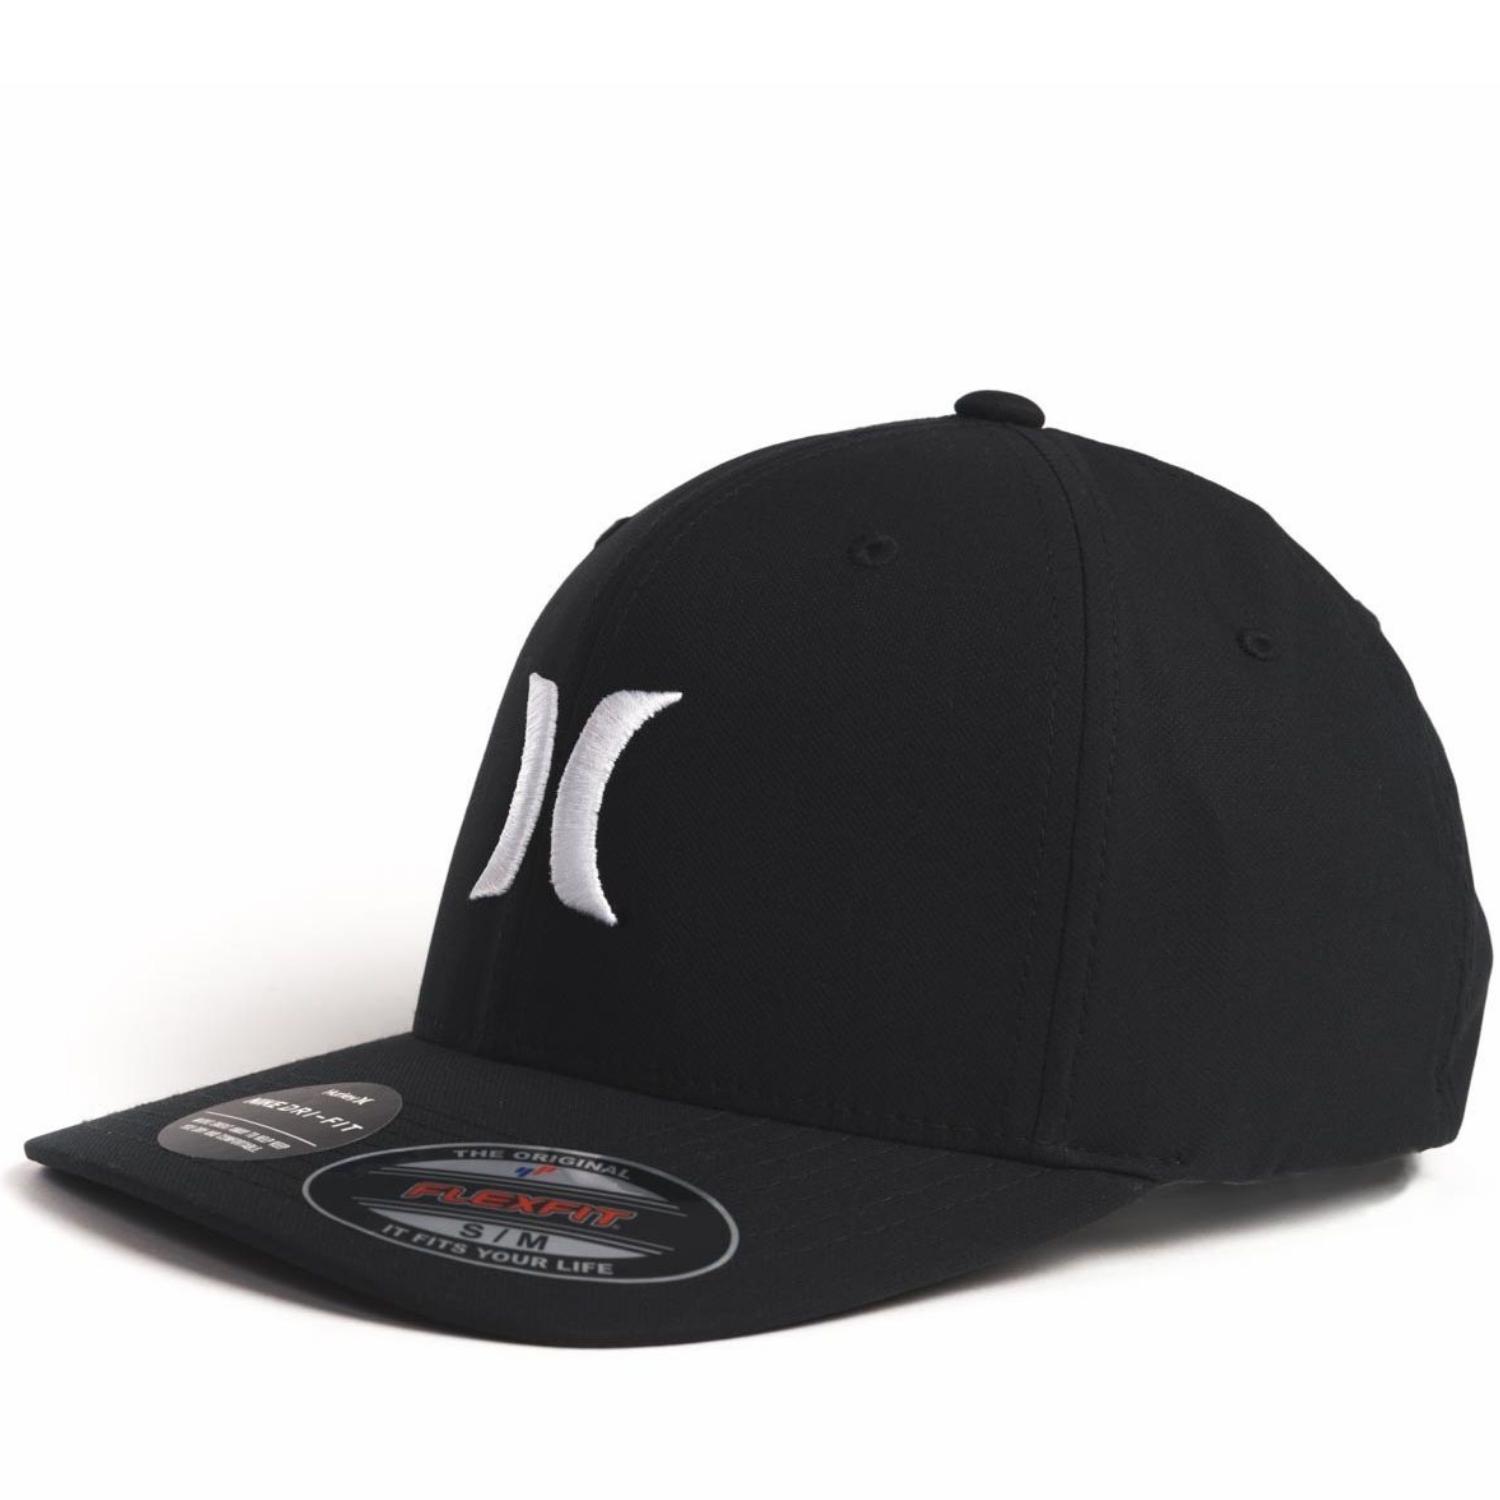 Hurley H2O Dri-Fit One And Only Hat - Black/(White) - Baseball Cap by Hurley